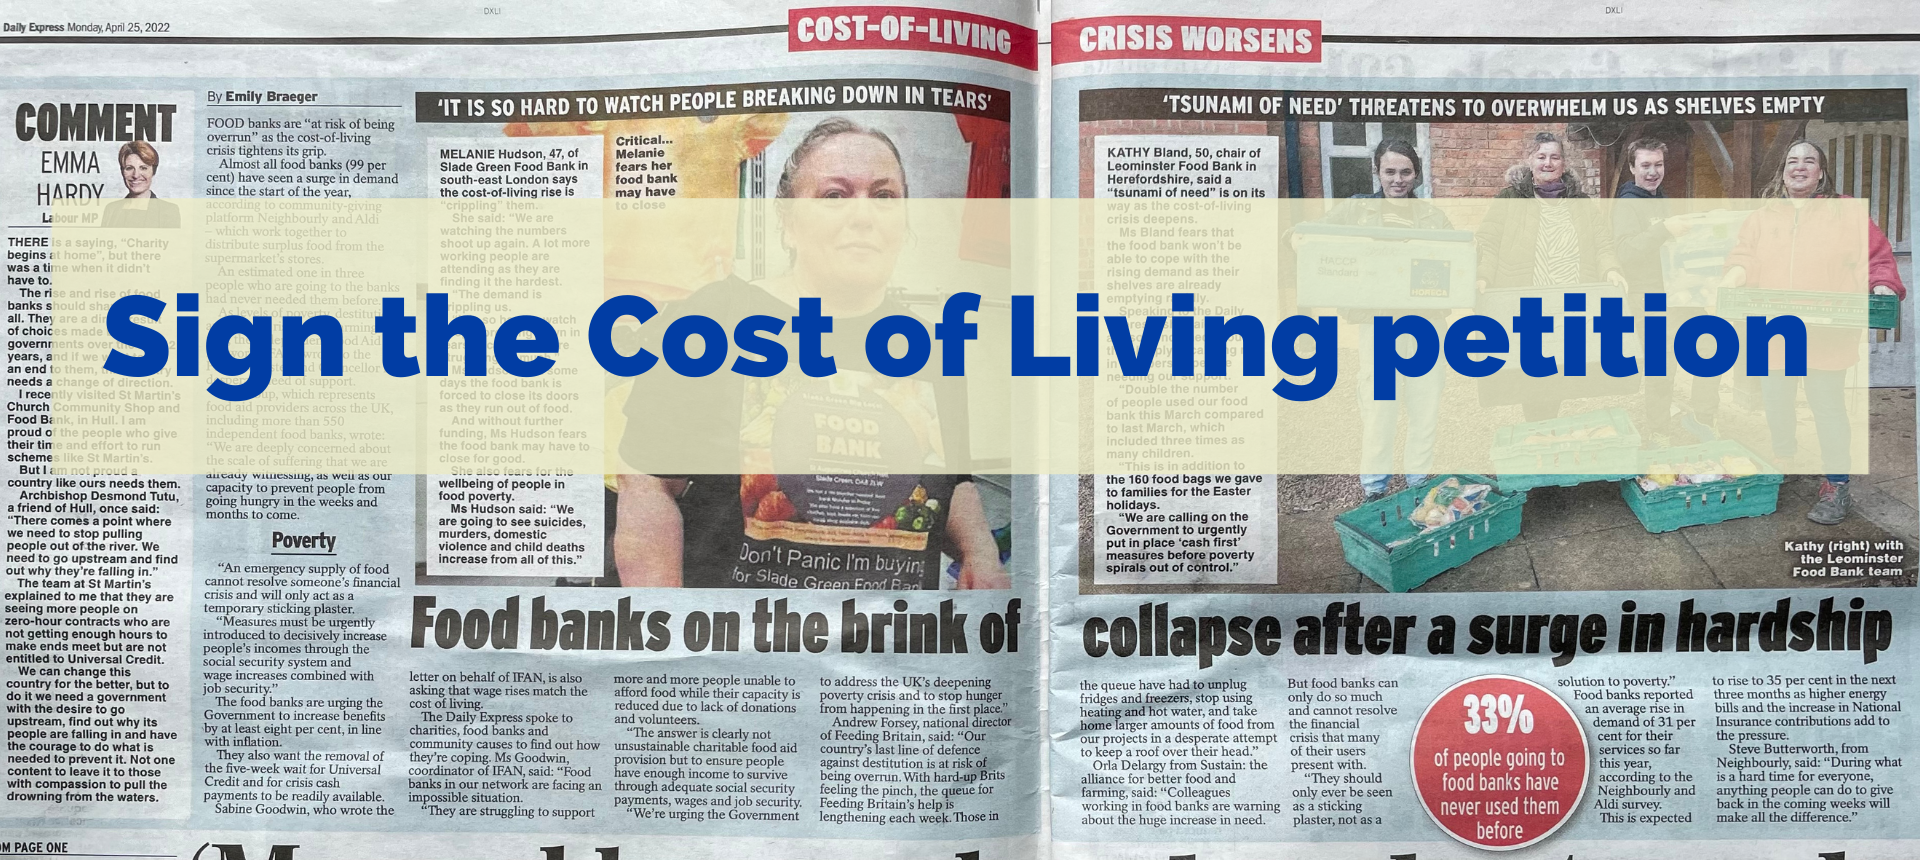 Sign the Cost of Living Petition